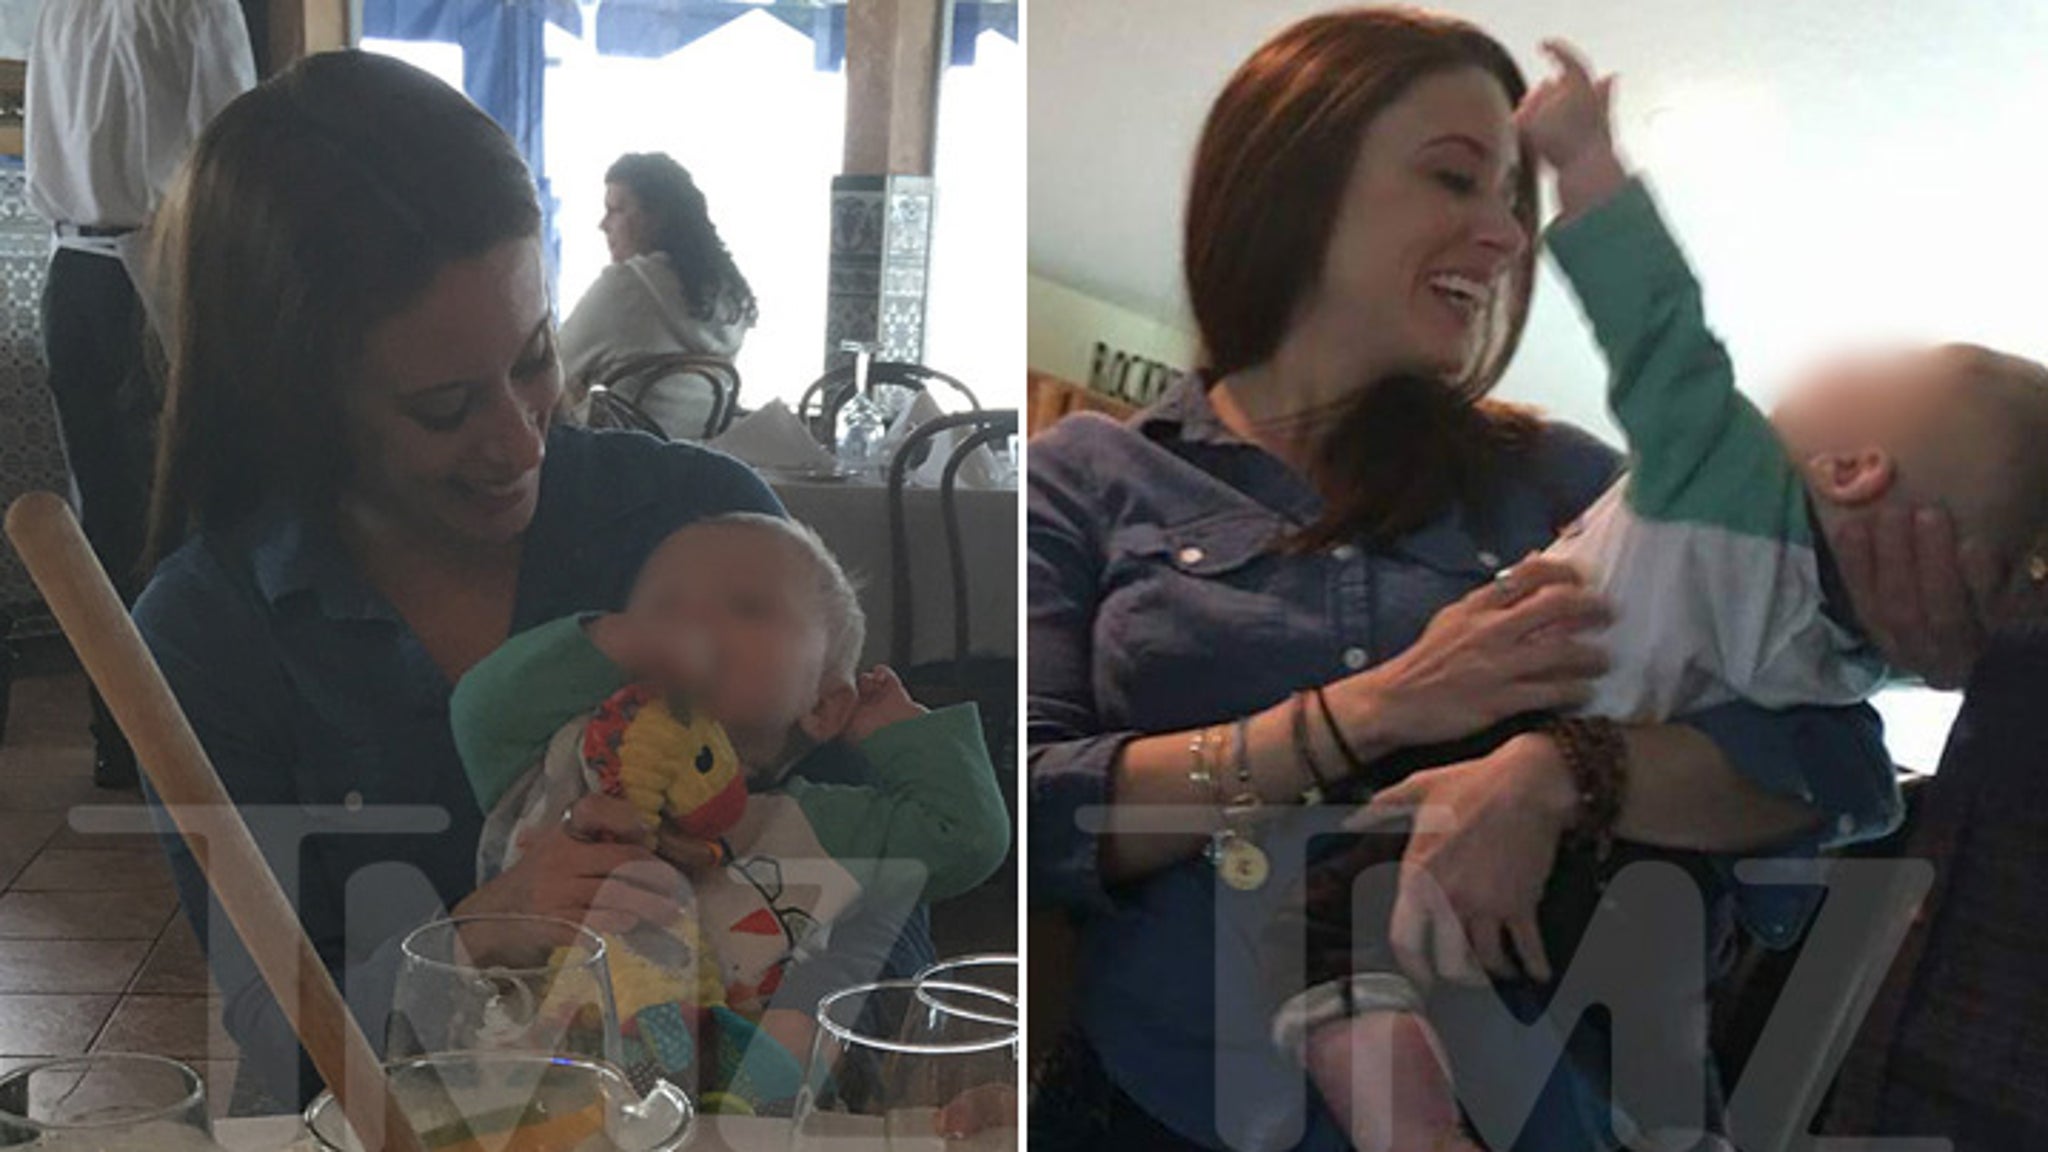 Casey Anthony Photographed with Baby in Her Arms (PHOTO GALLERY) .